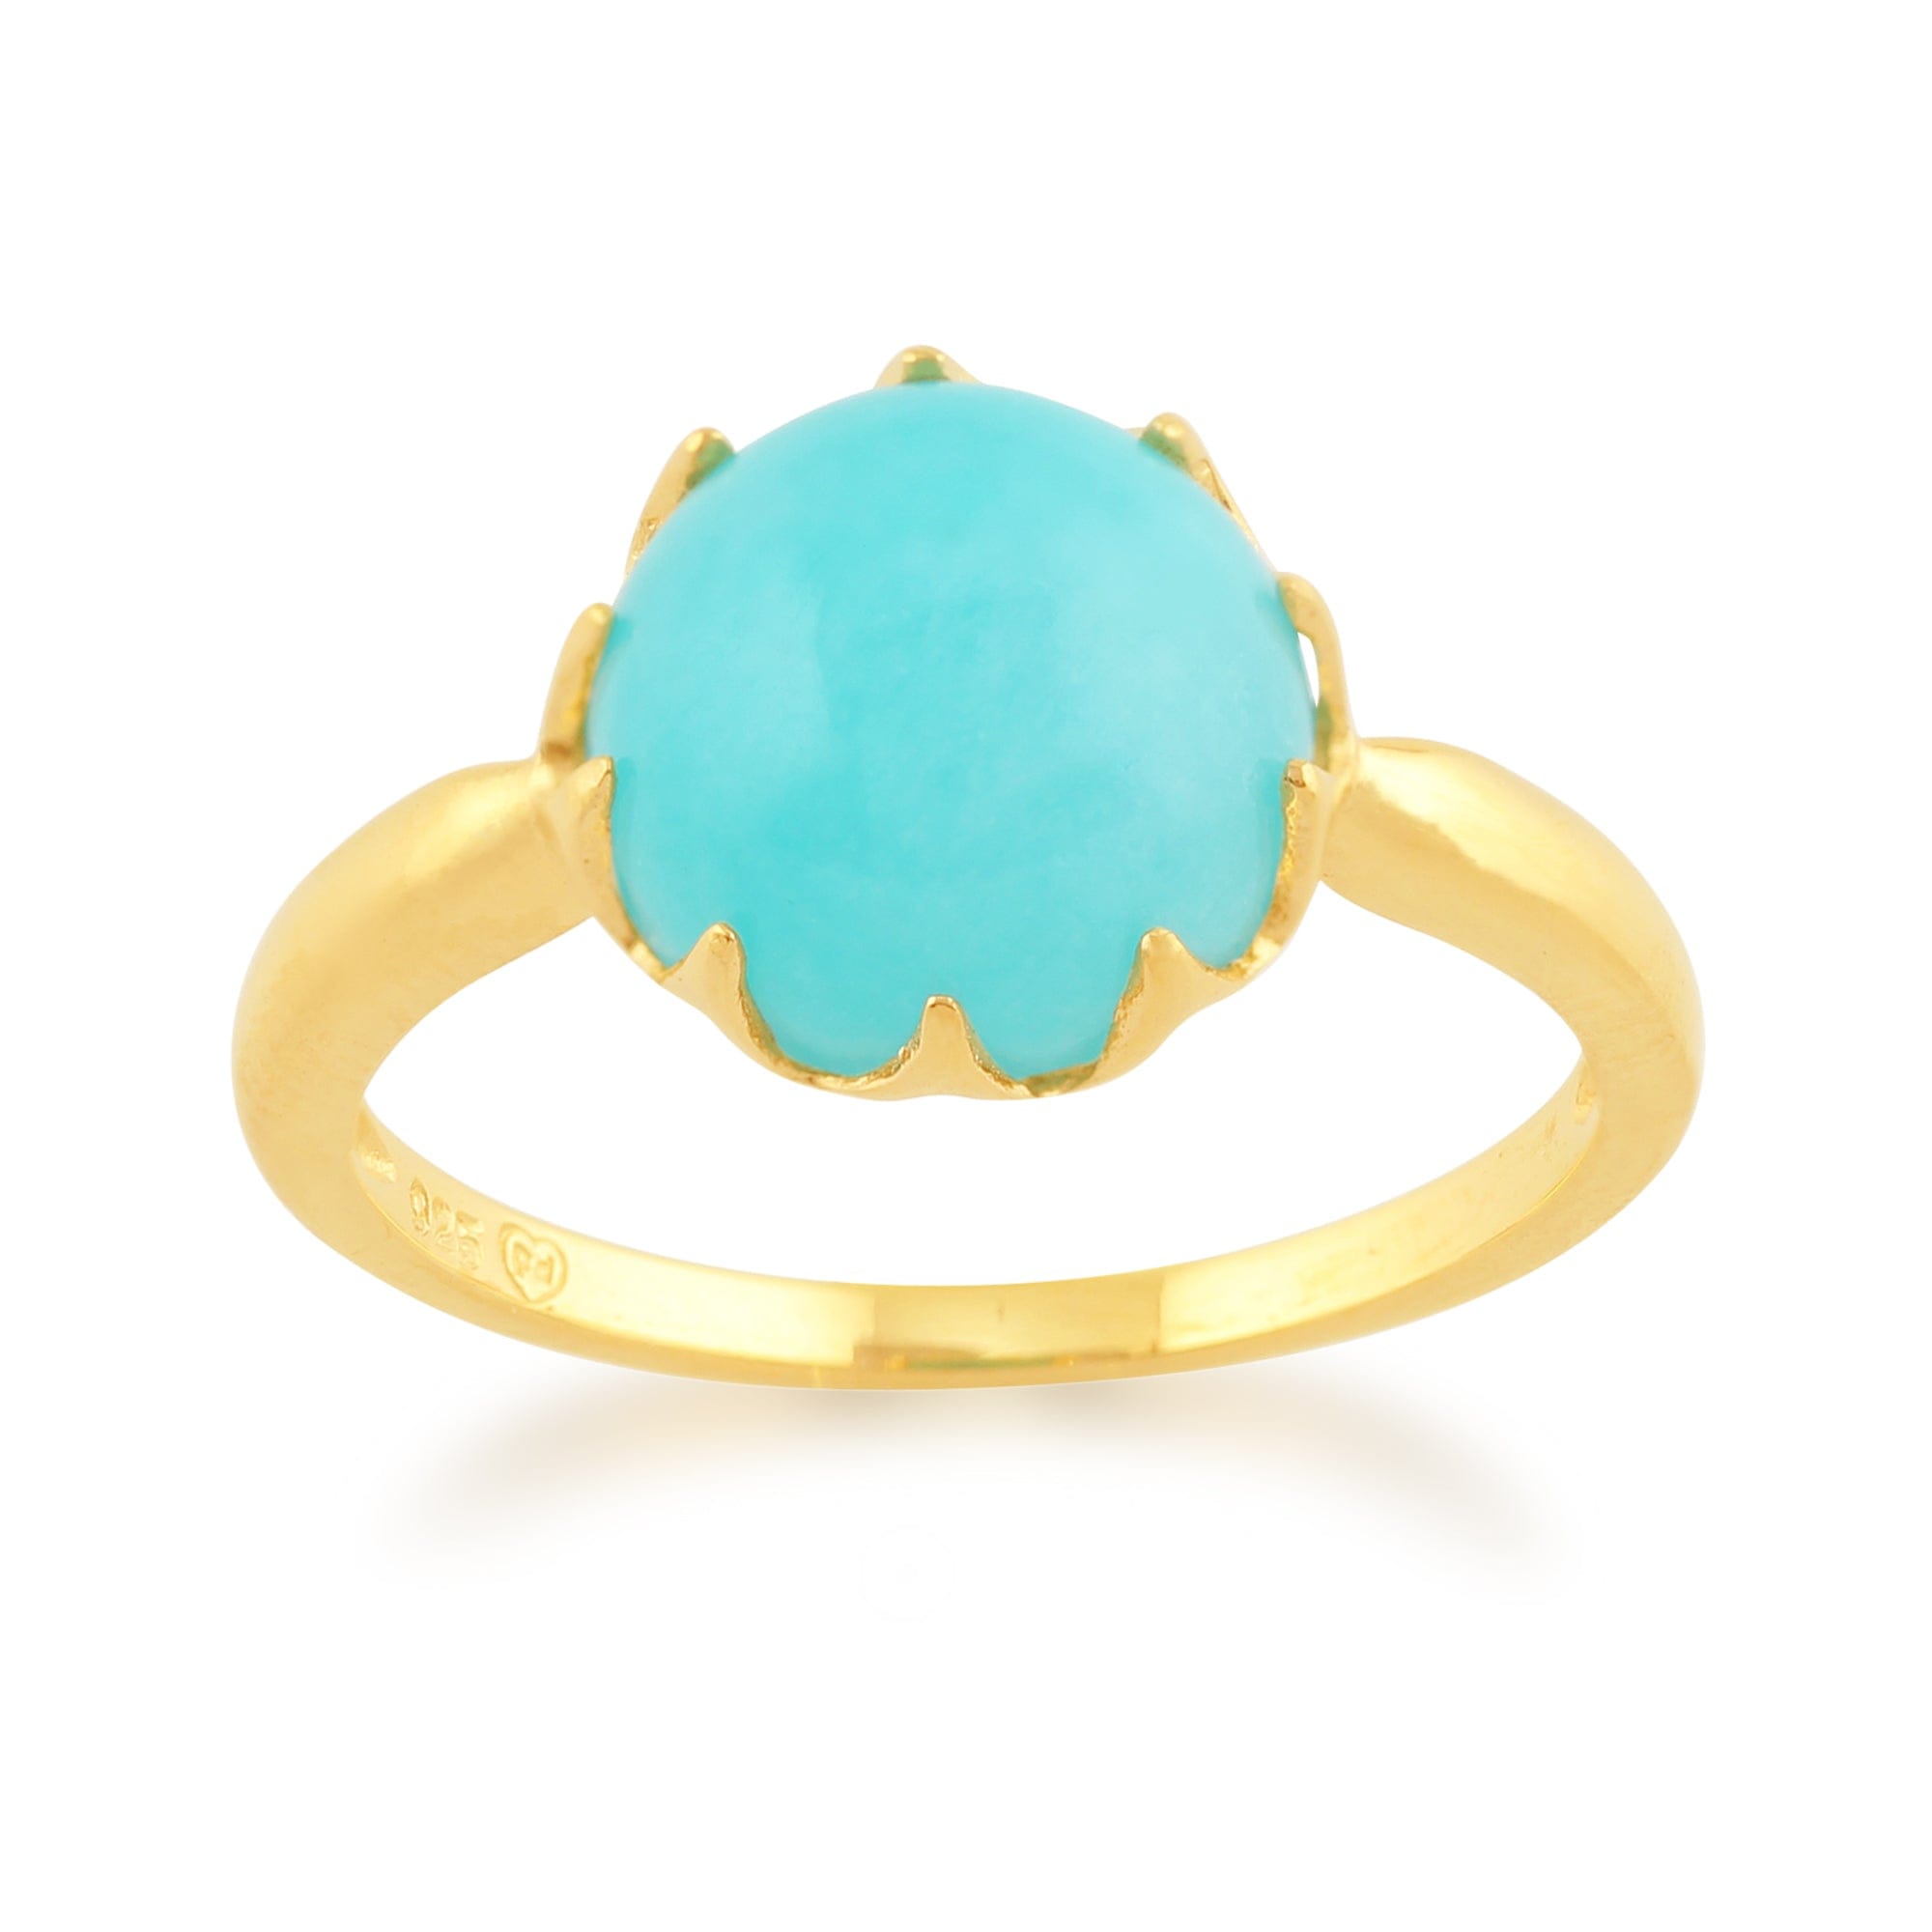 Amazonite 'Calo' Pastel Ring in 9ct Yellow Gold Plated Sterling Silver  Image 1